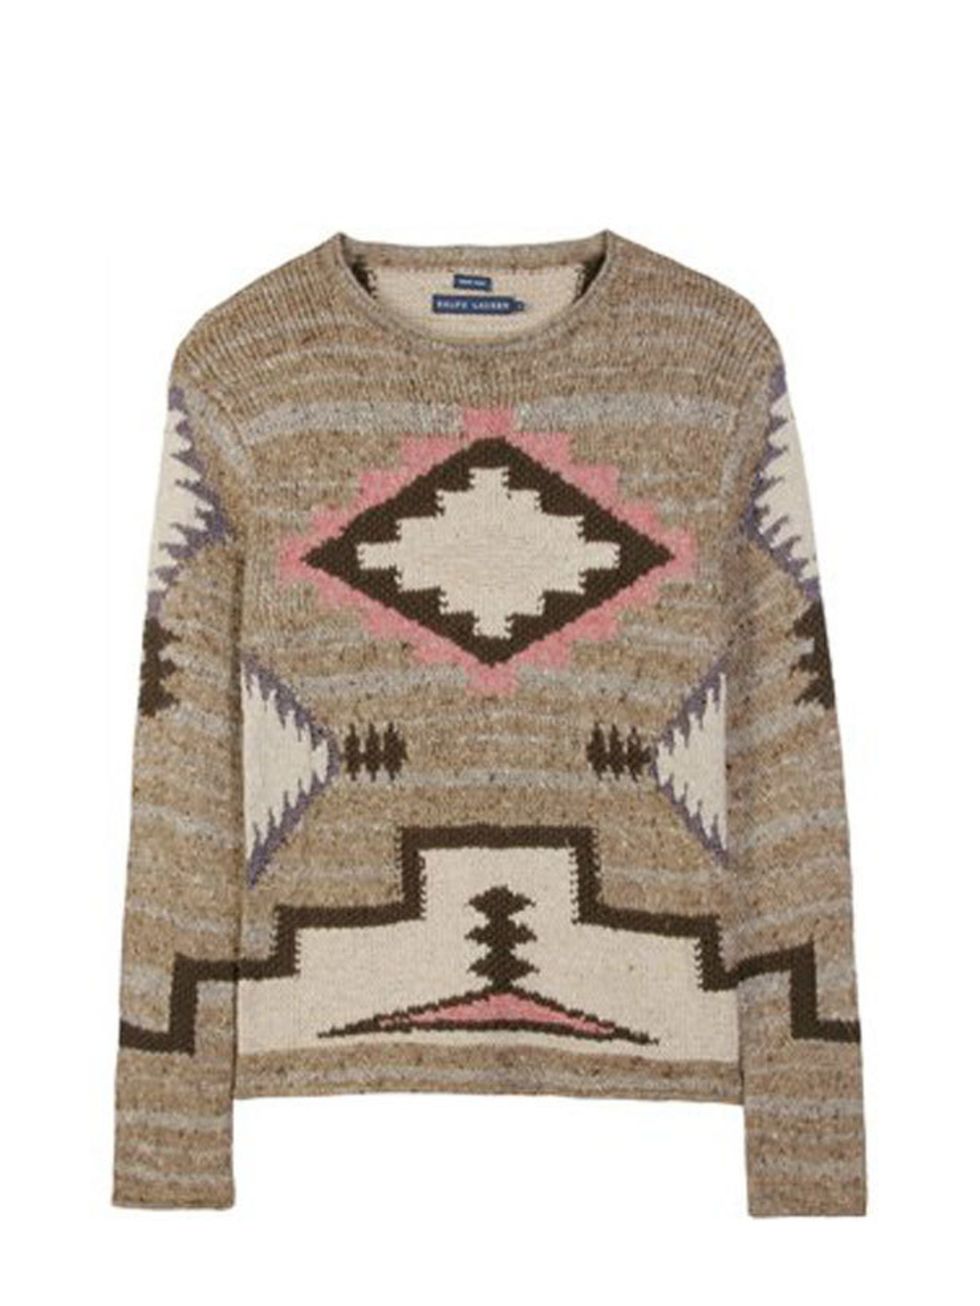 <p>Patterned knitted jumper, £409.88, by Ralph Lauren at <a href="http://www.mytheresa.com/shop/SIERRA-BEACON-PULLOVER-p-12380.html">Mytheresa</a></p>